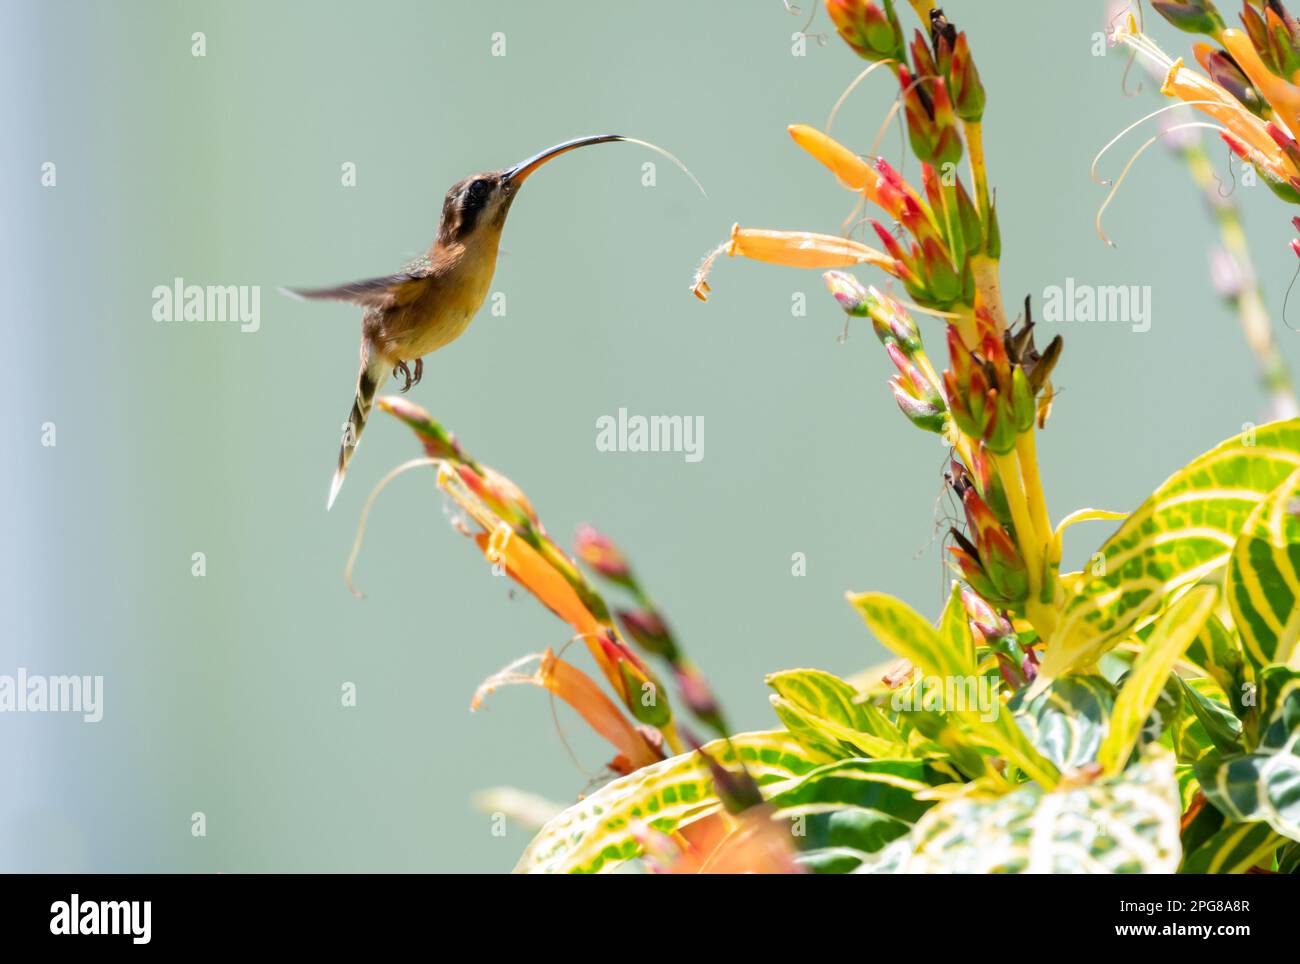 Little Hermit hummingbird with tongue out hovering next to orange flowers. Stock Photo